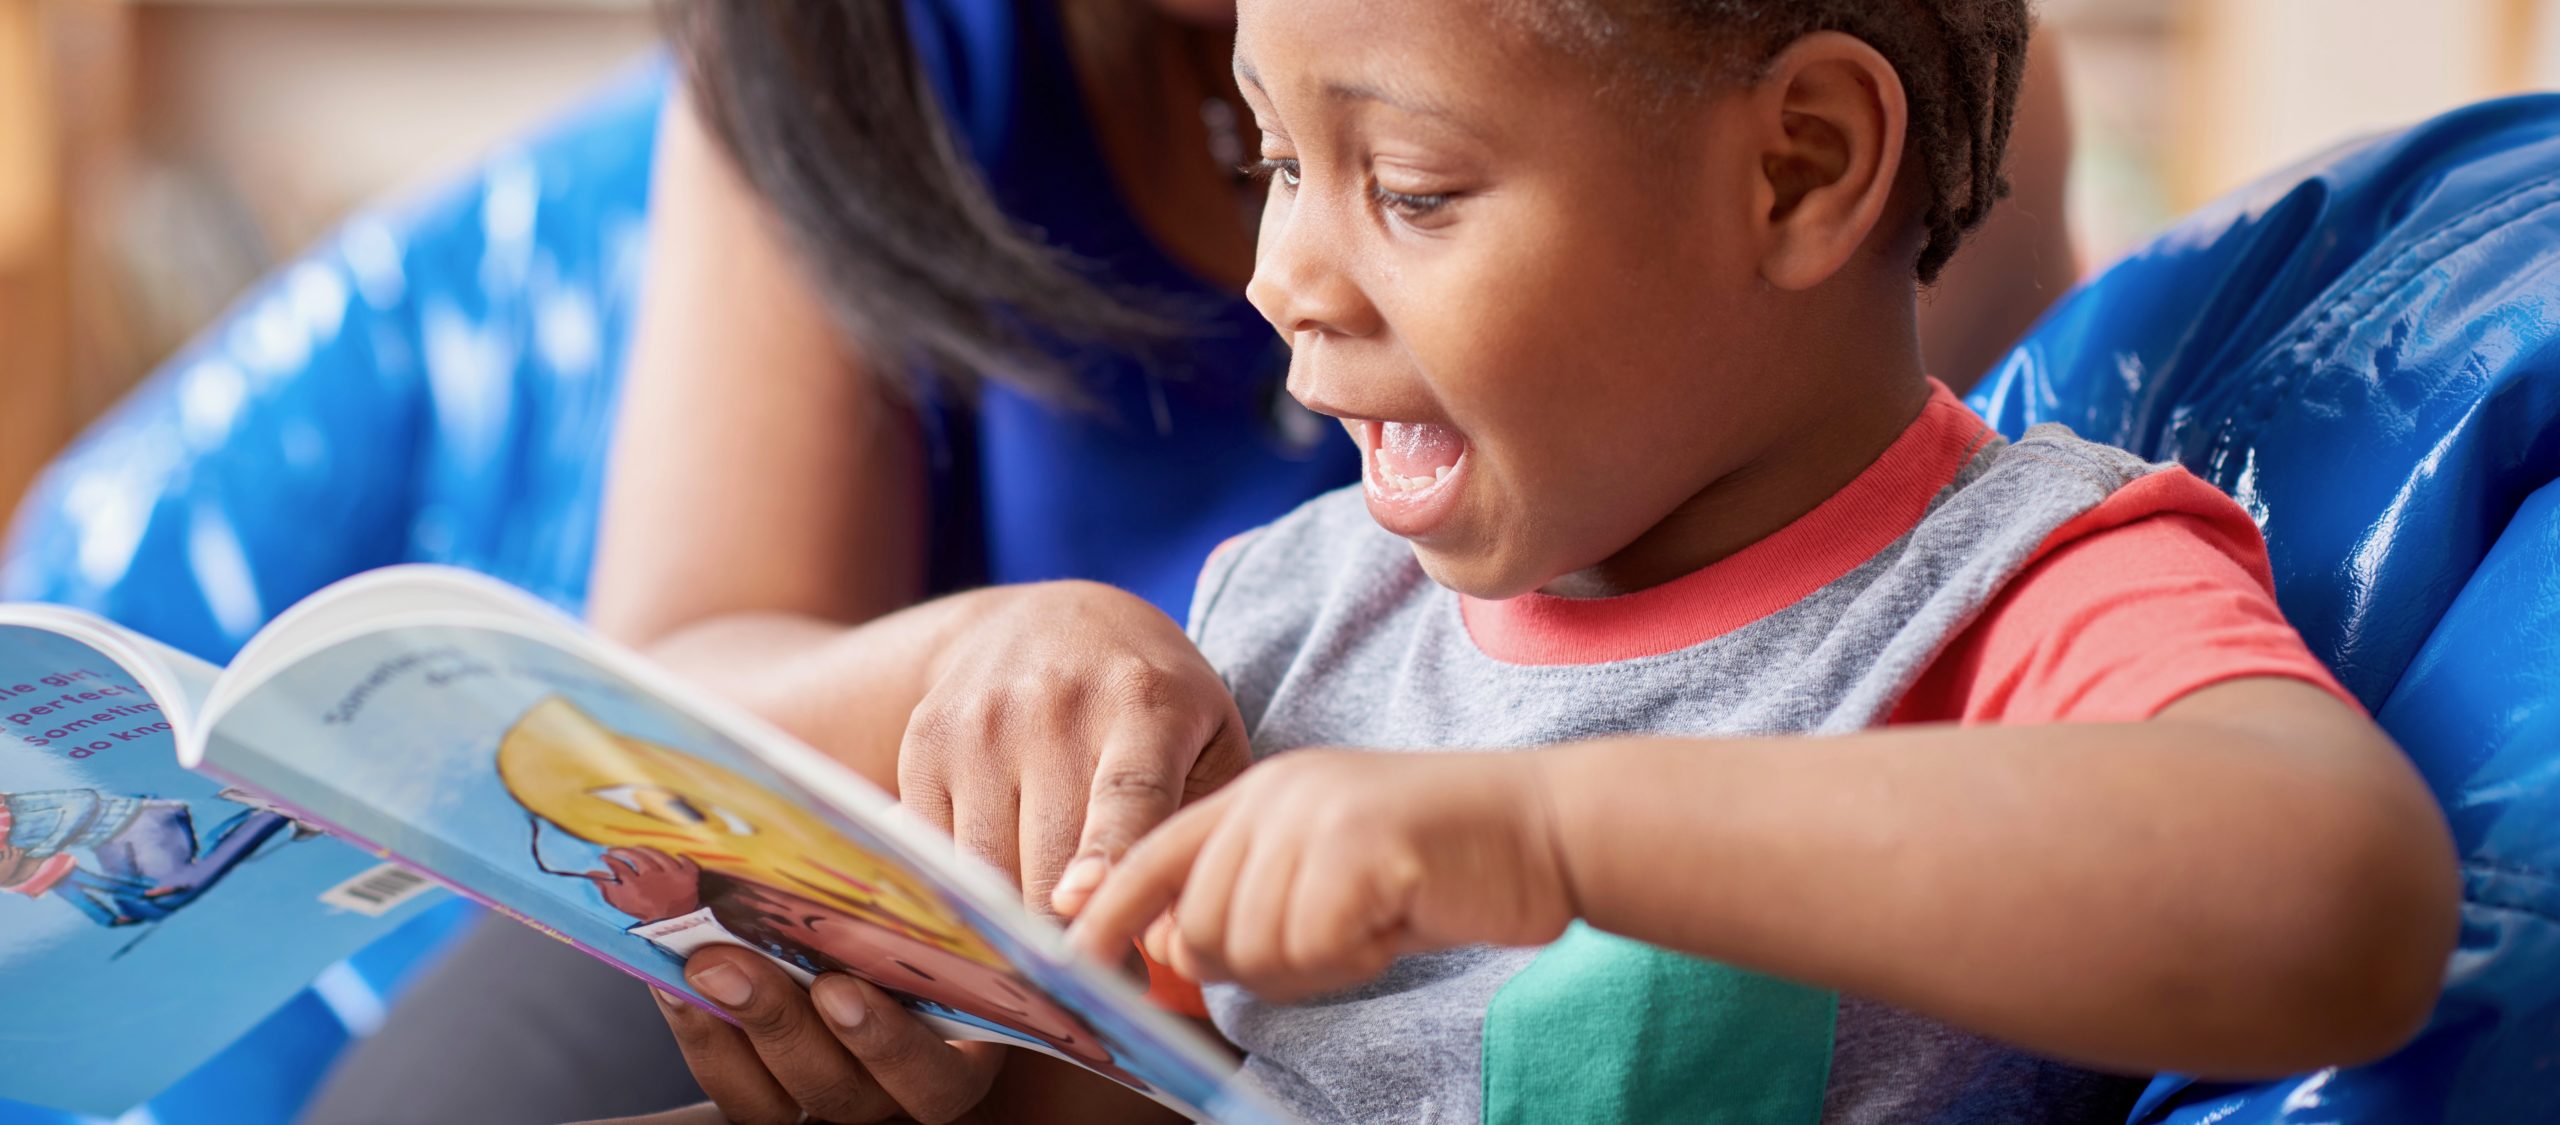 A Parent’s Guide to Reading Concerns During COVID